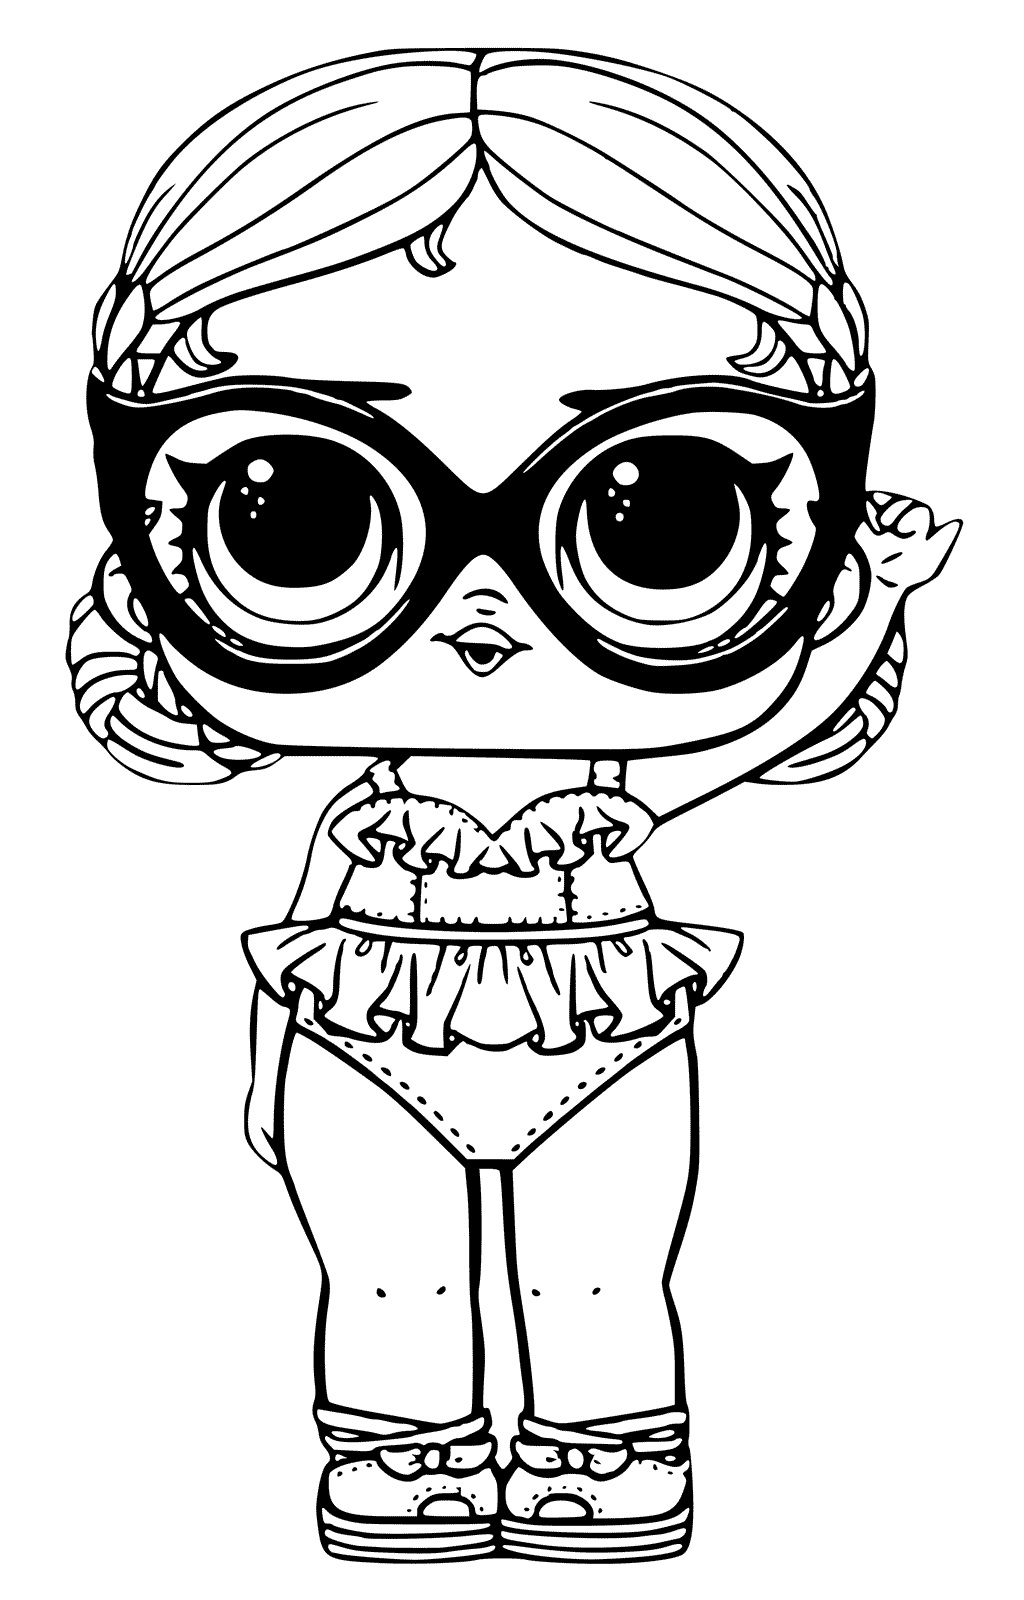 LOL Coloring Pages FREE Printable 49